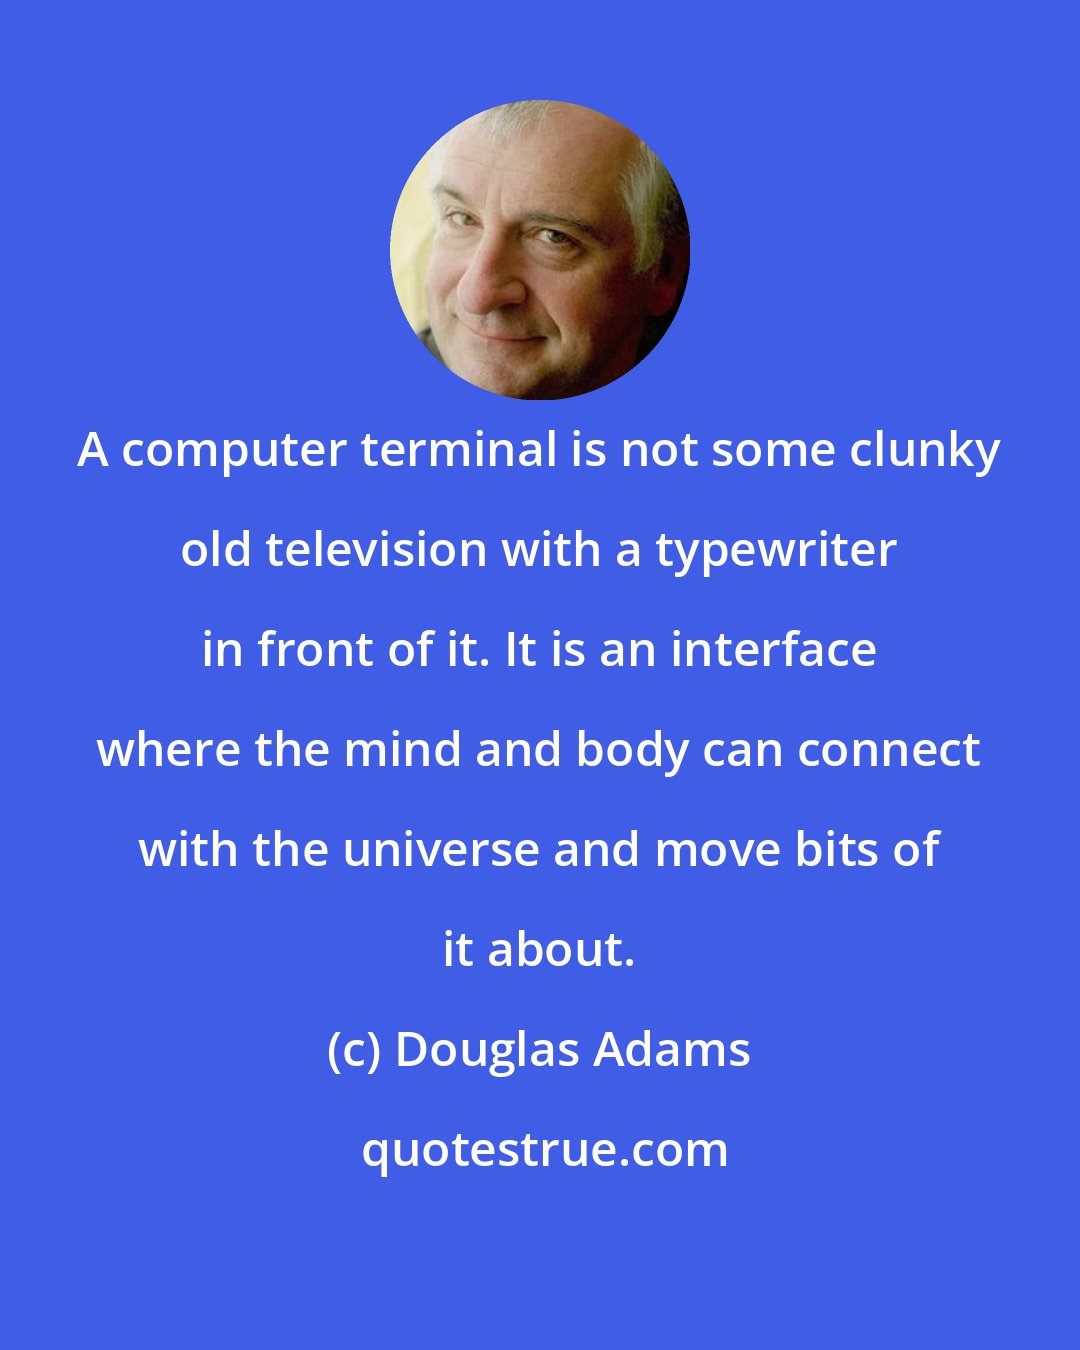 Douglas Adams: A computer terminal is not some clunky old television with a typewriter in front of it. It is an interface where the mind and body can connect with the universe and move bits of it about.